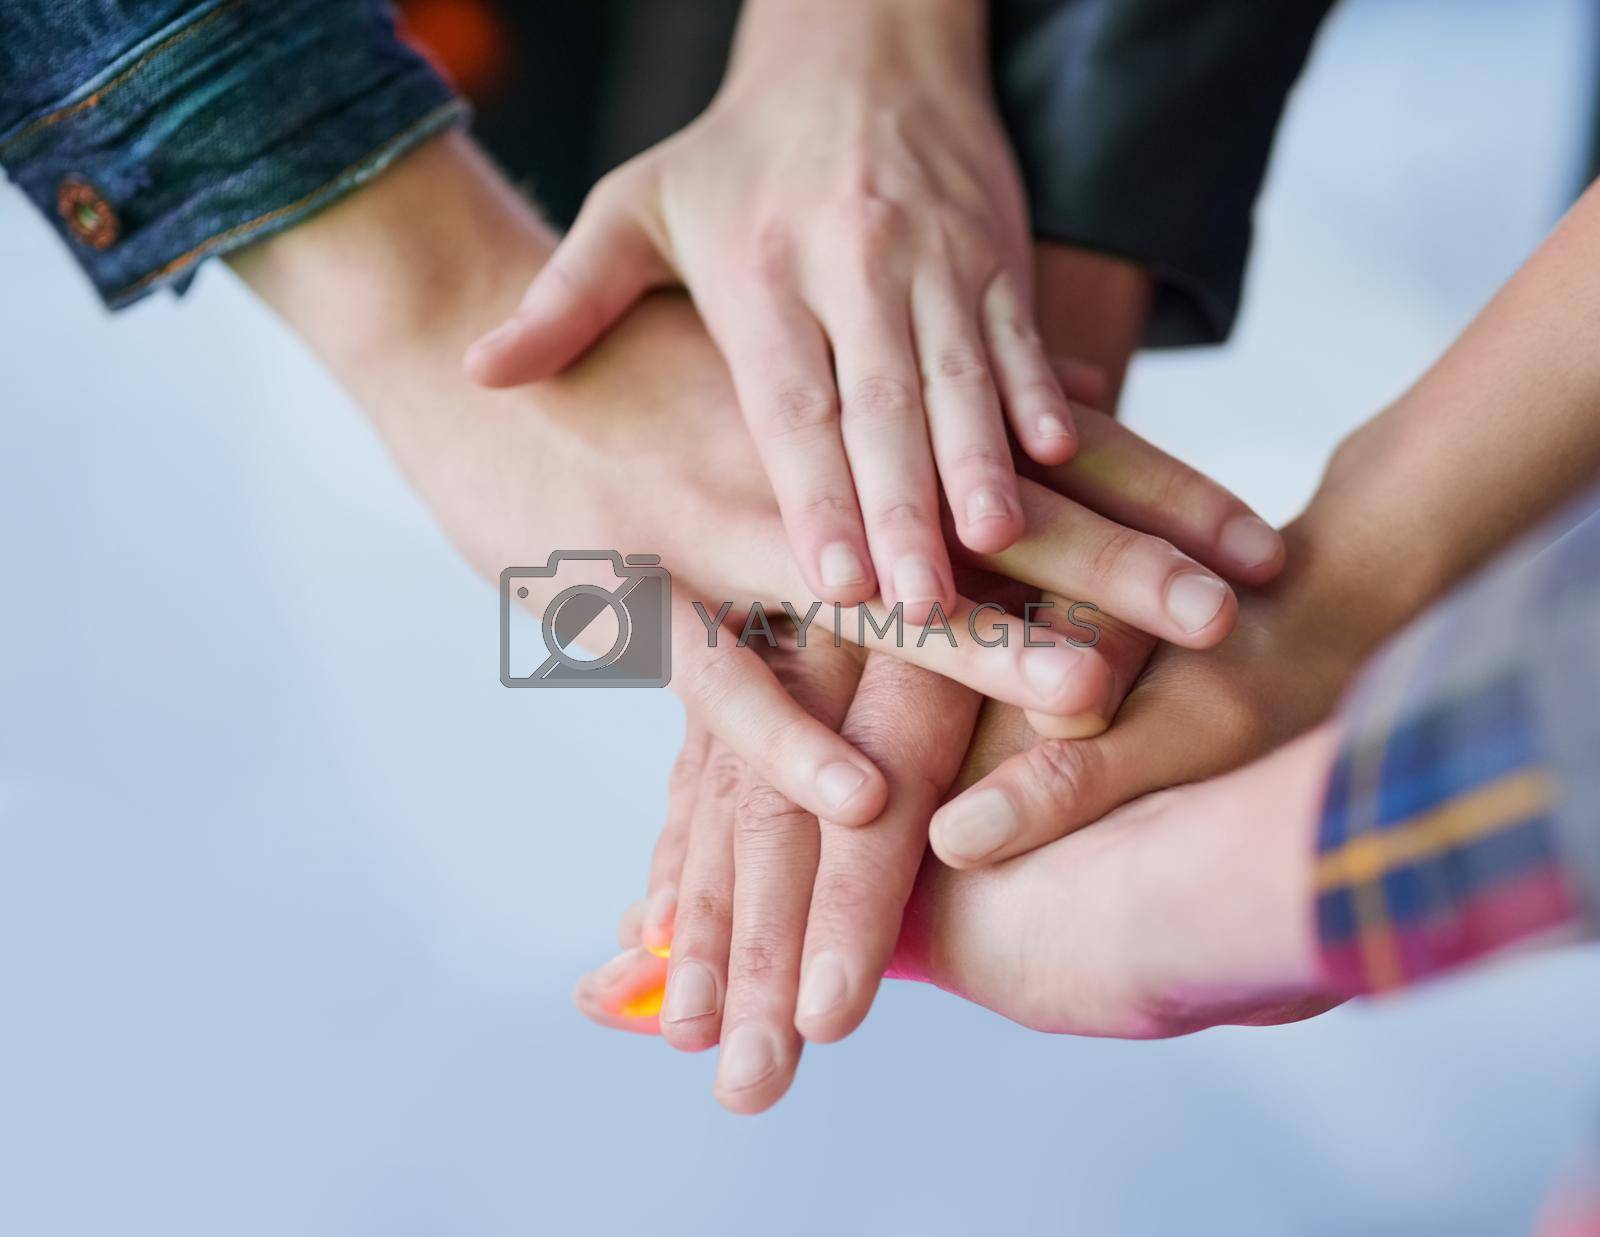 Royalty free image of Making a pact to stay friends forever. Shot of a group of unidentifiable friends making a pact by putting their hands in a pile. by YuriArcurs